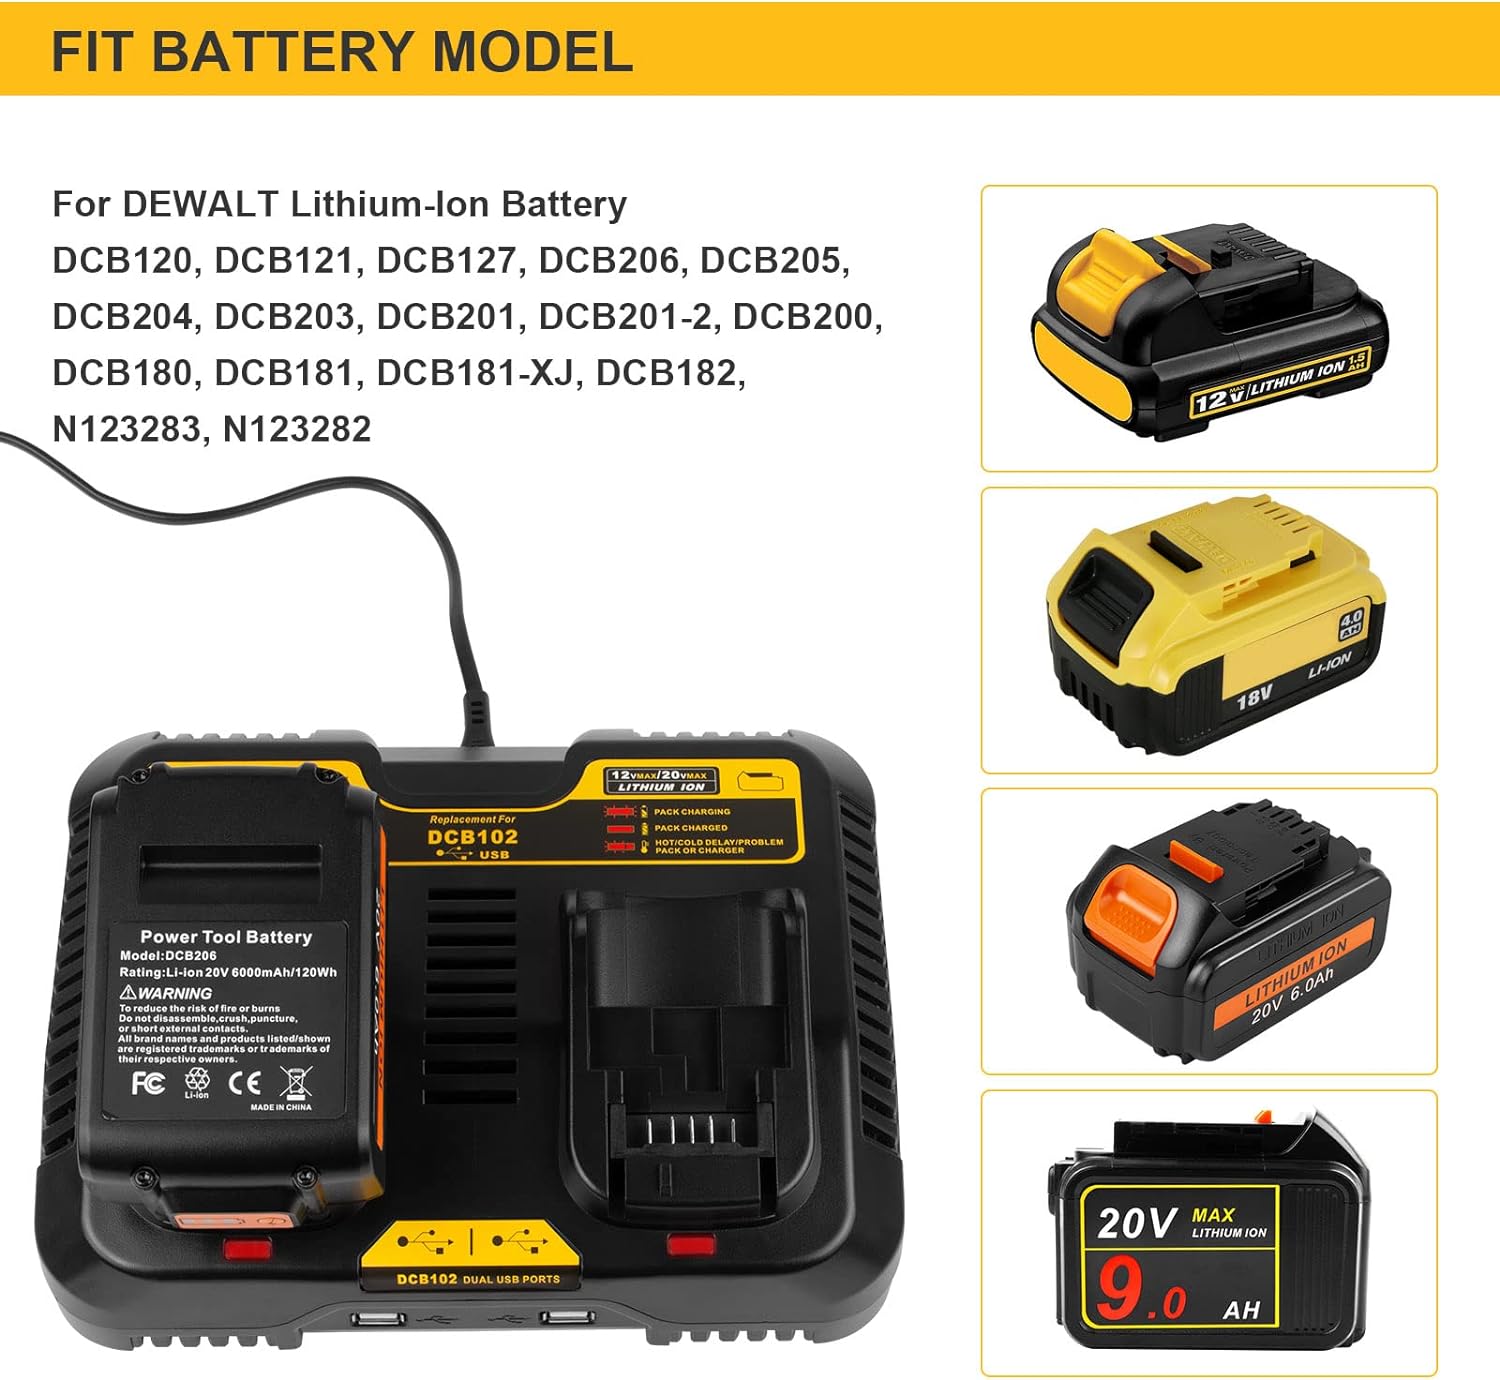 Replacement for DCB102 Dewalt Dual Charger DCB102BP 3A Fast Charger with 2 USB Ports Compatible with Dewalt 20 Volt Max